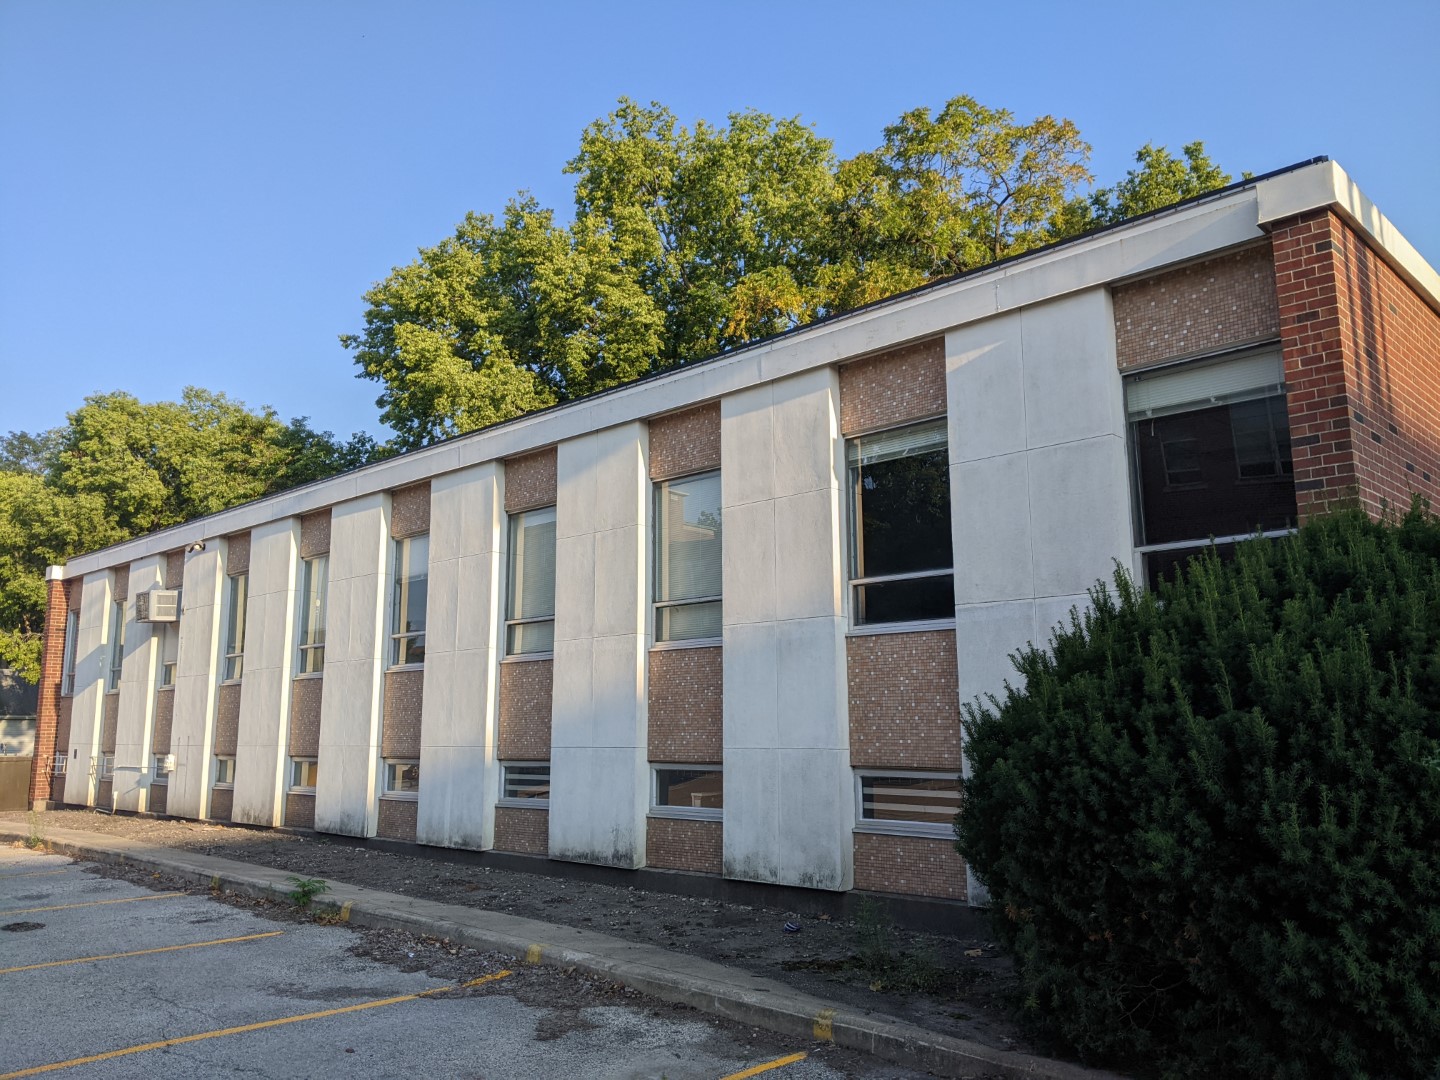 The outside of a brick and cement building. There are columns separating tile walls and windows. There is a parking lot visible in the lower left corner. It's a sunny day with no clouds.